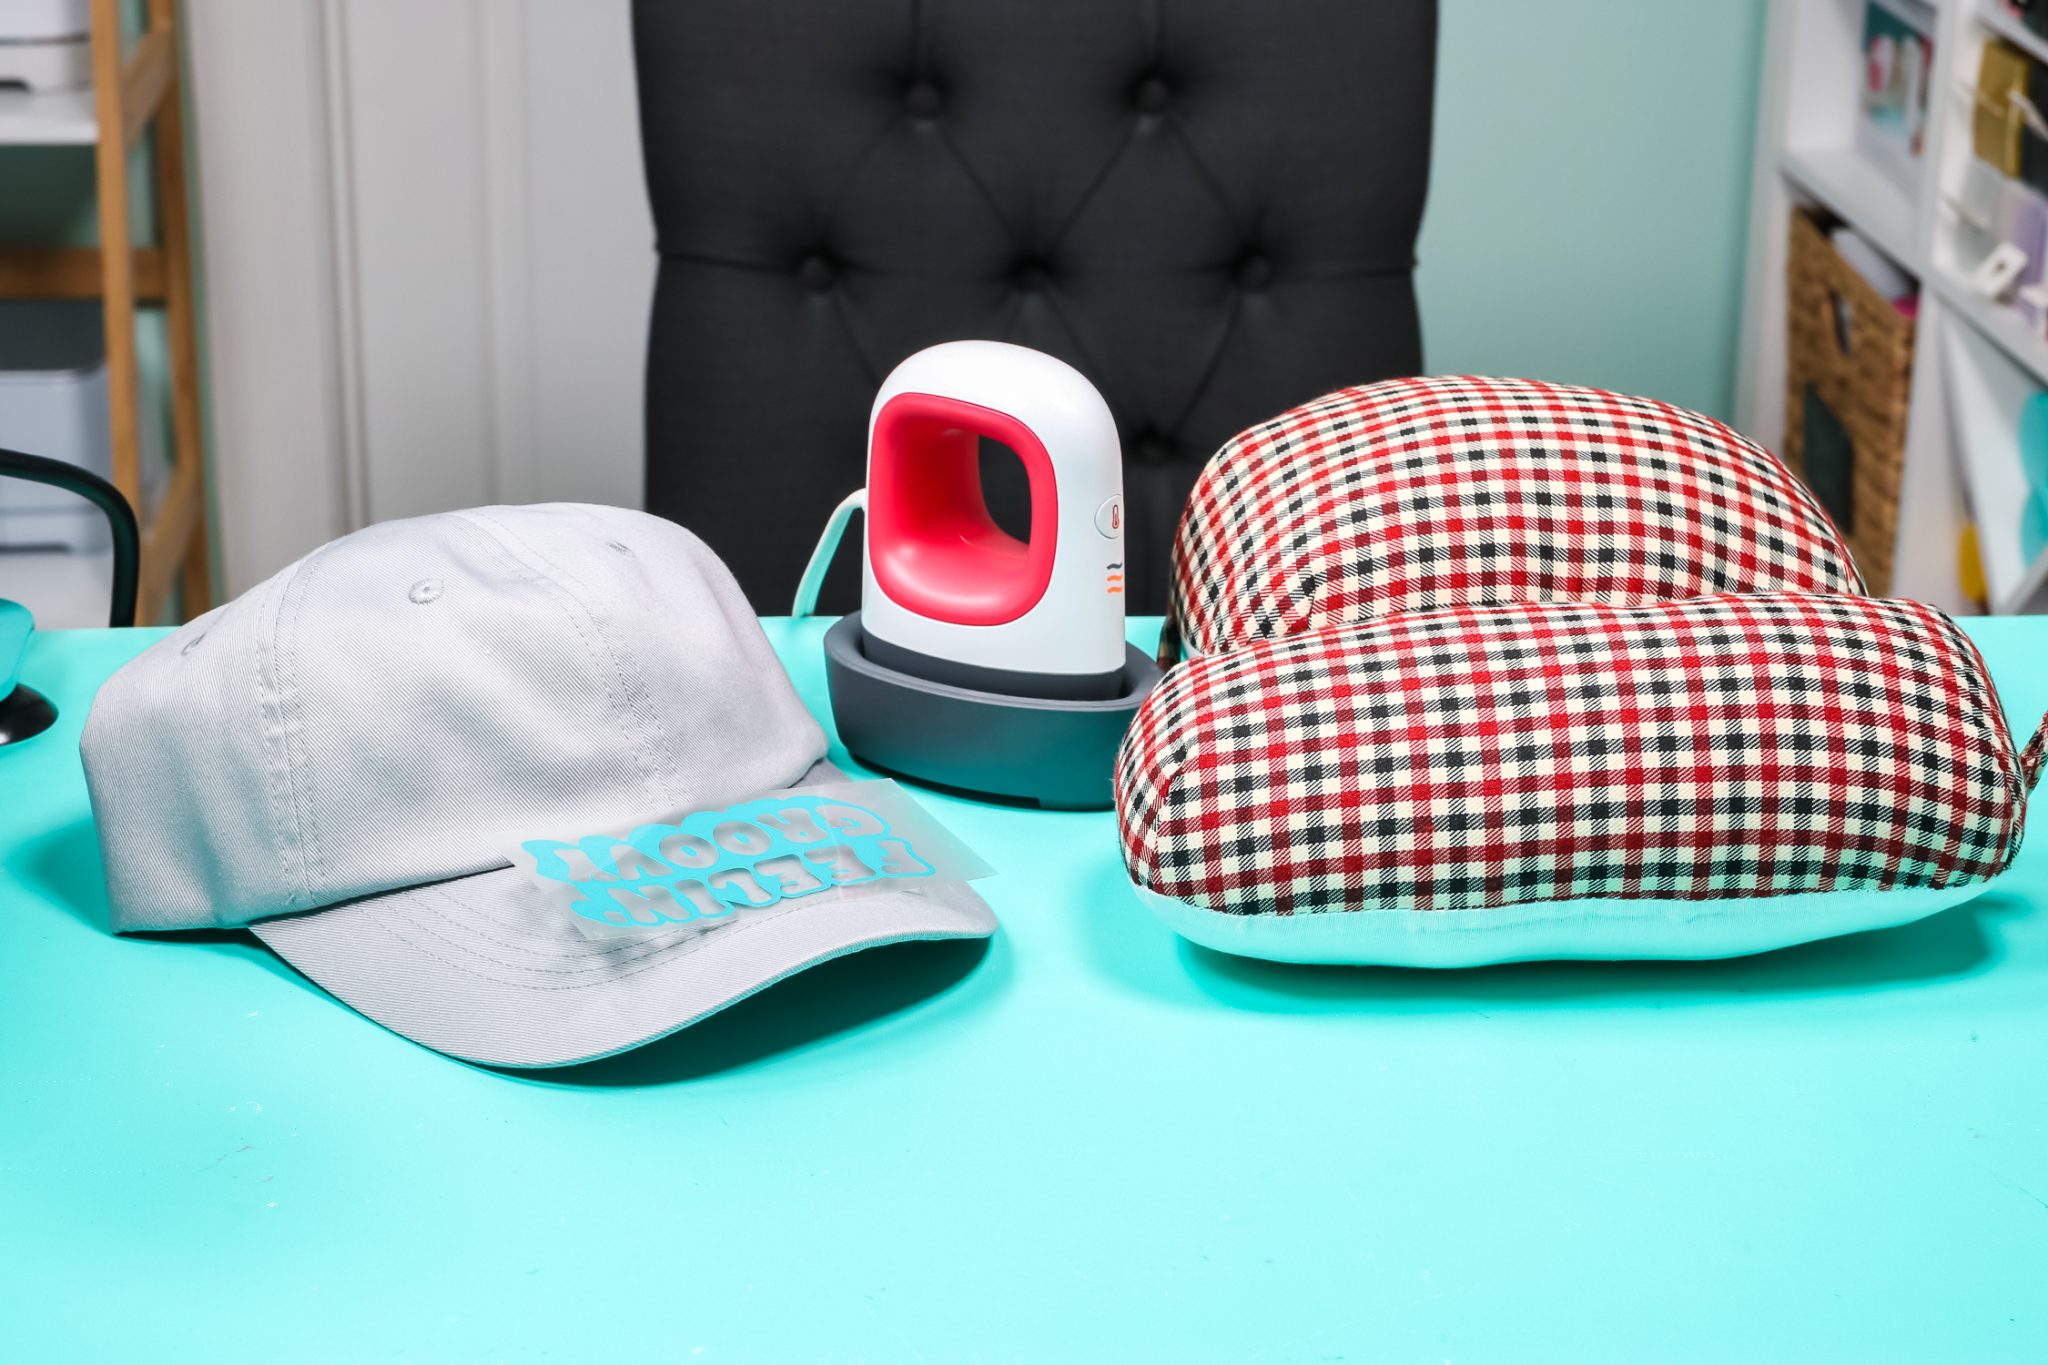 How to Heat Press Hats  Project Headware 